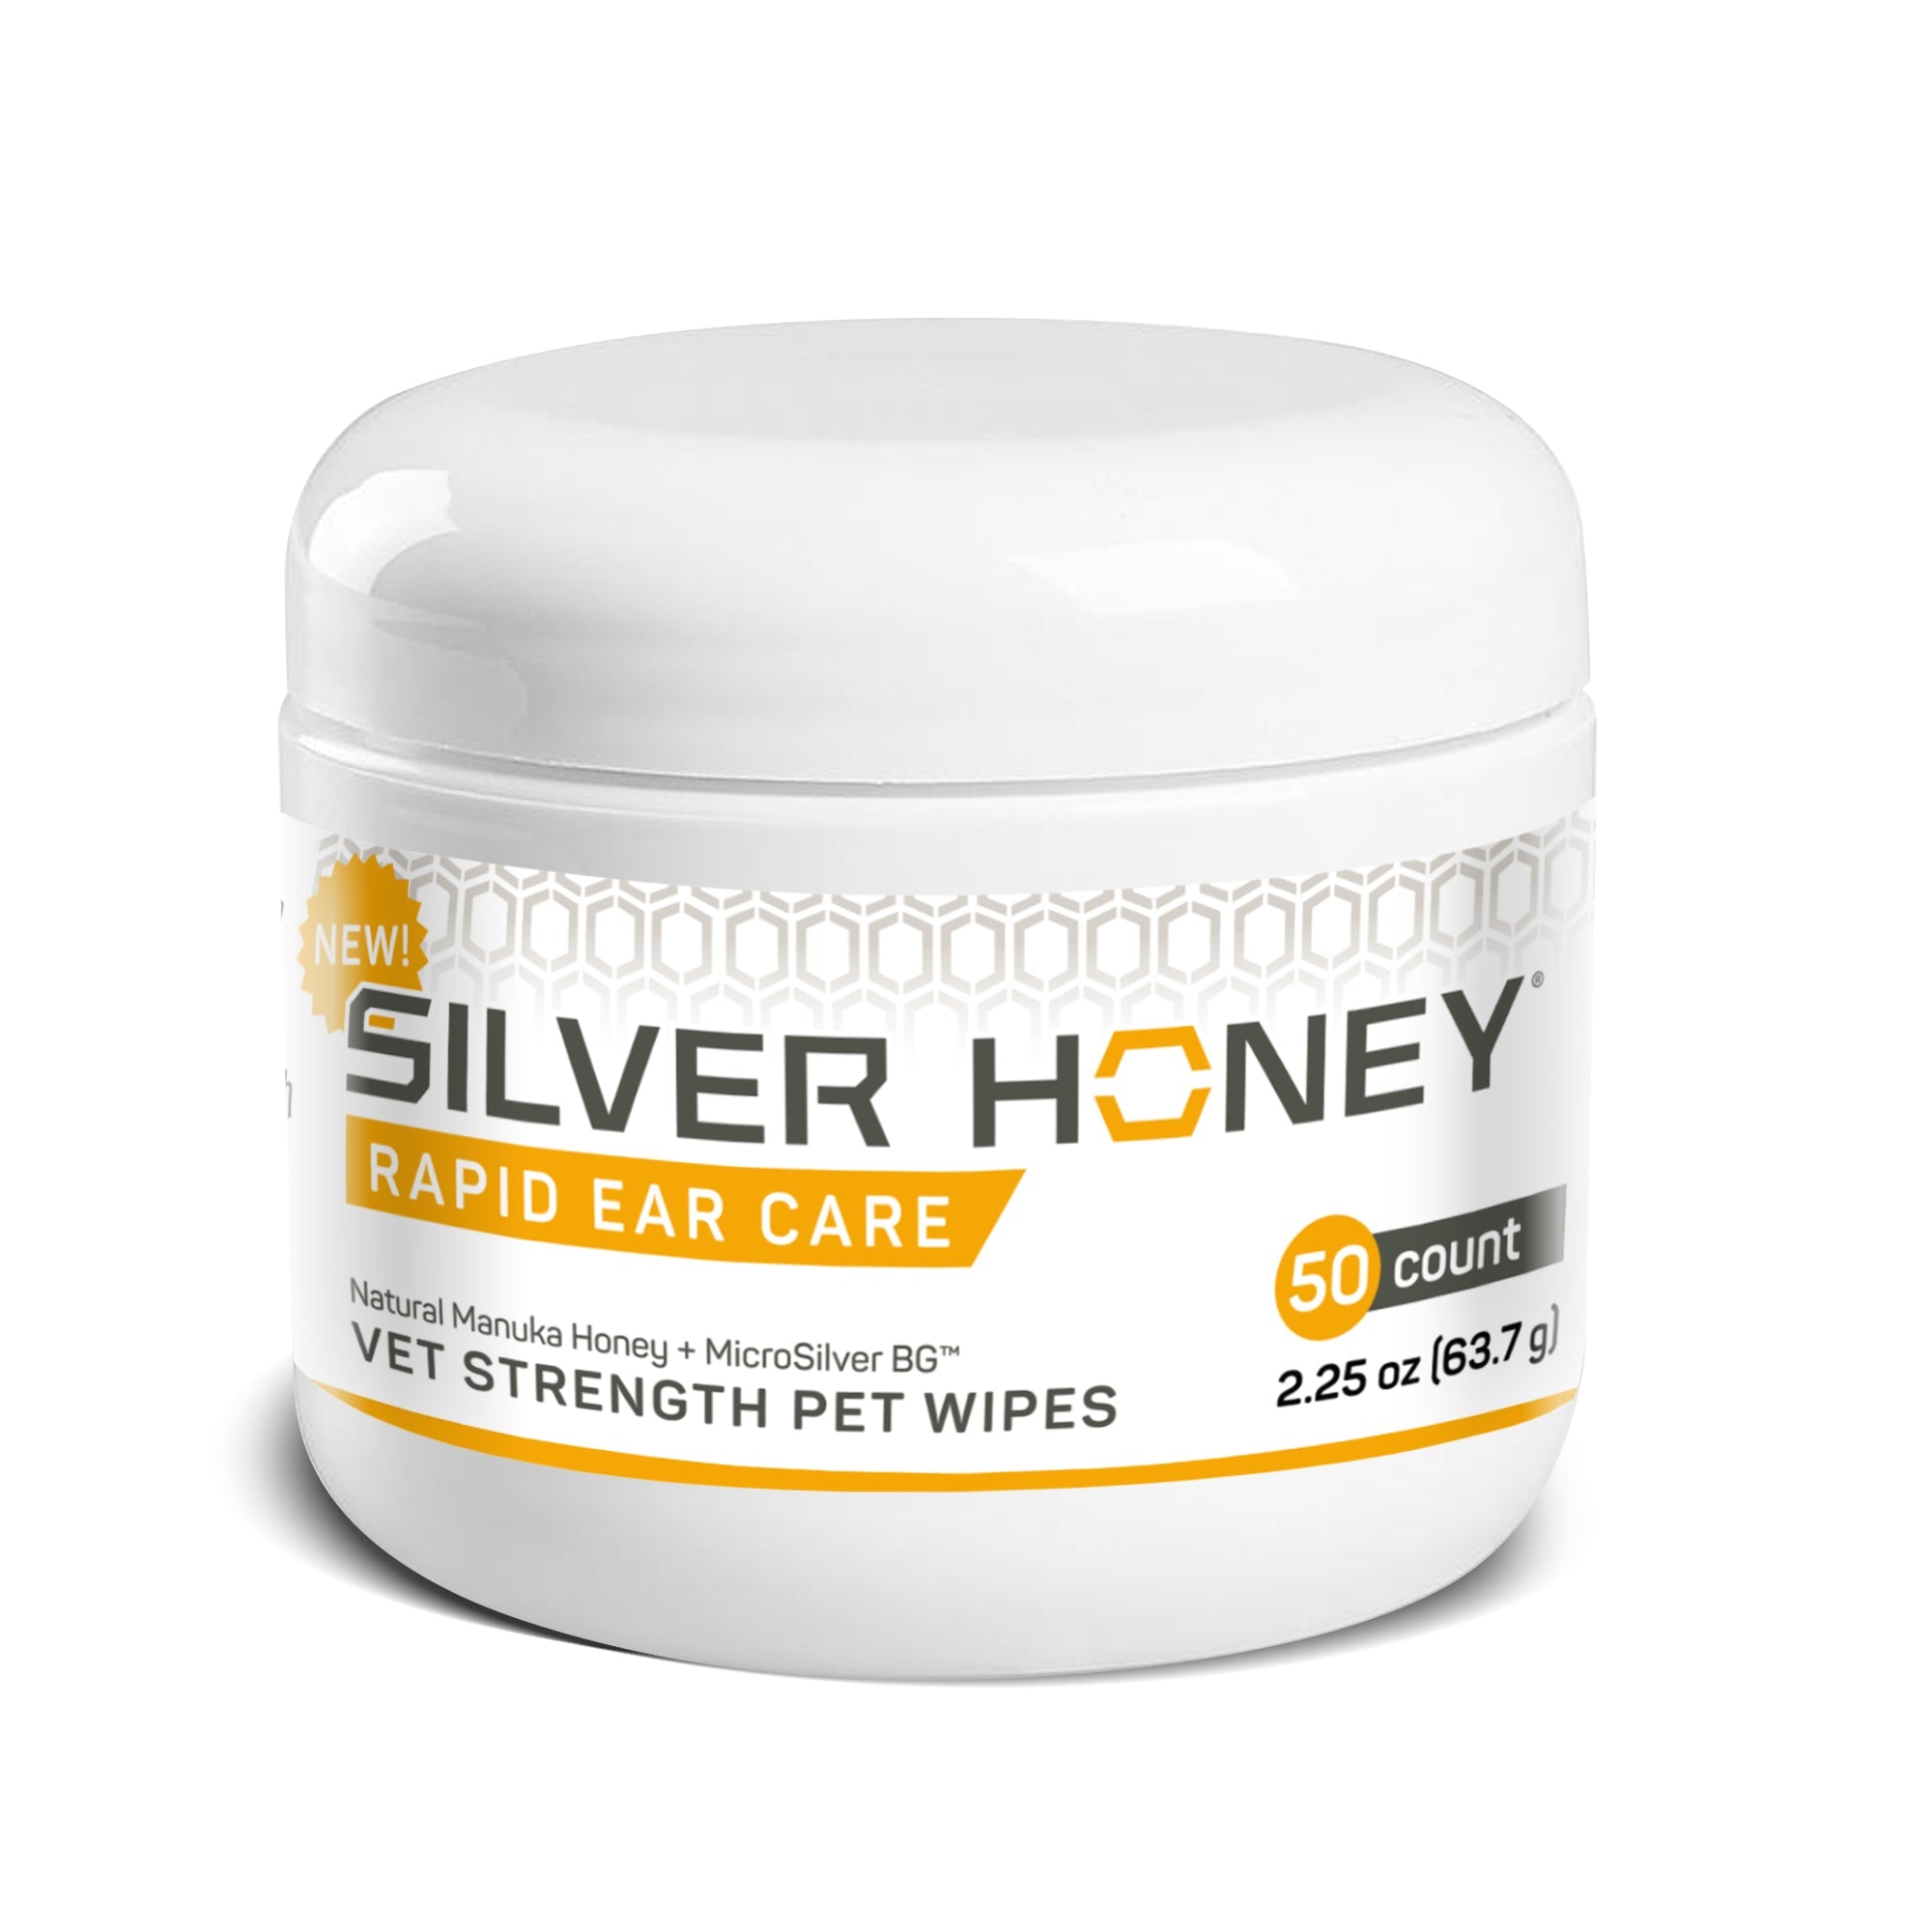 Silver Honey Rapid Ear Care Vet strength pet wipes 50 count container.